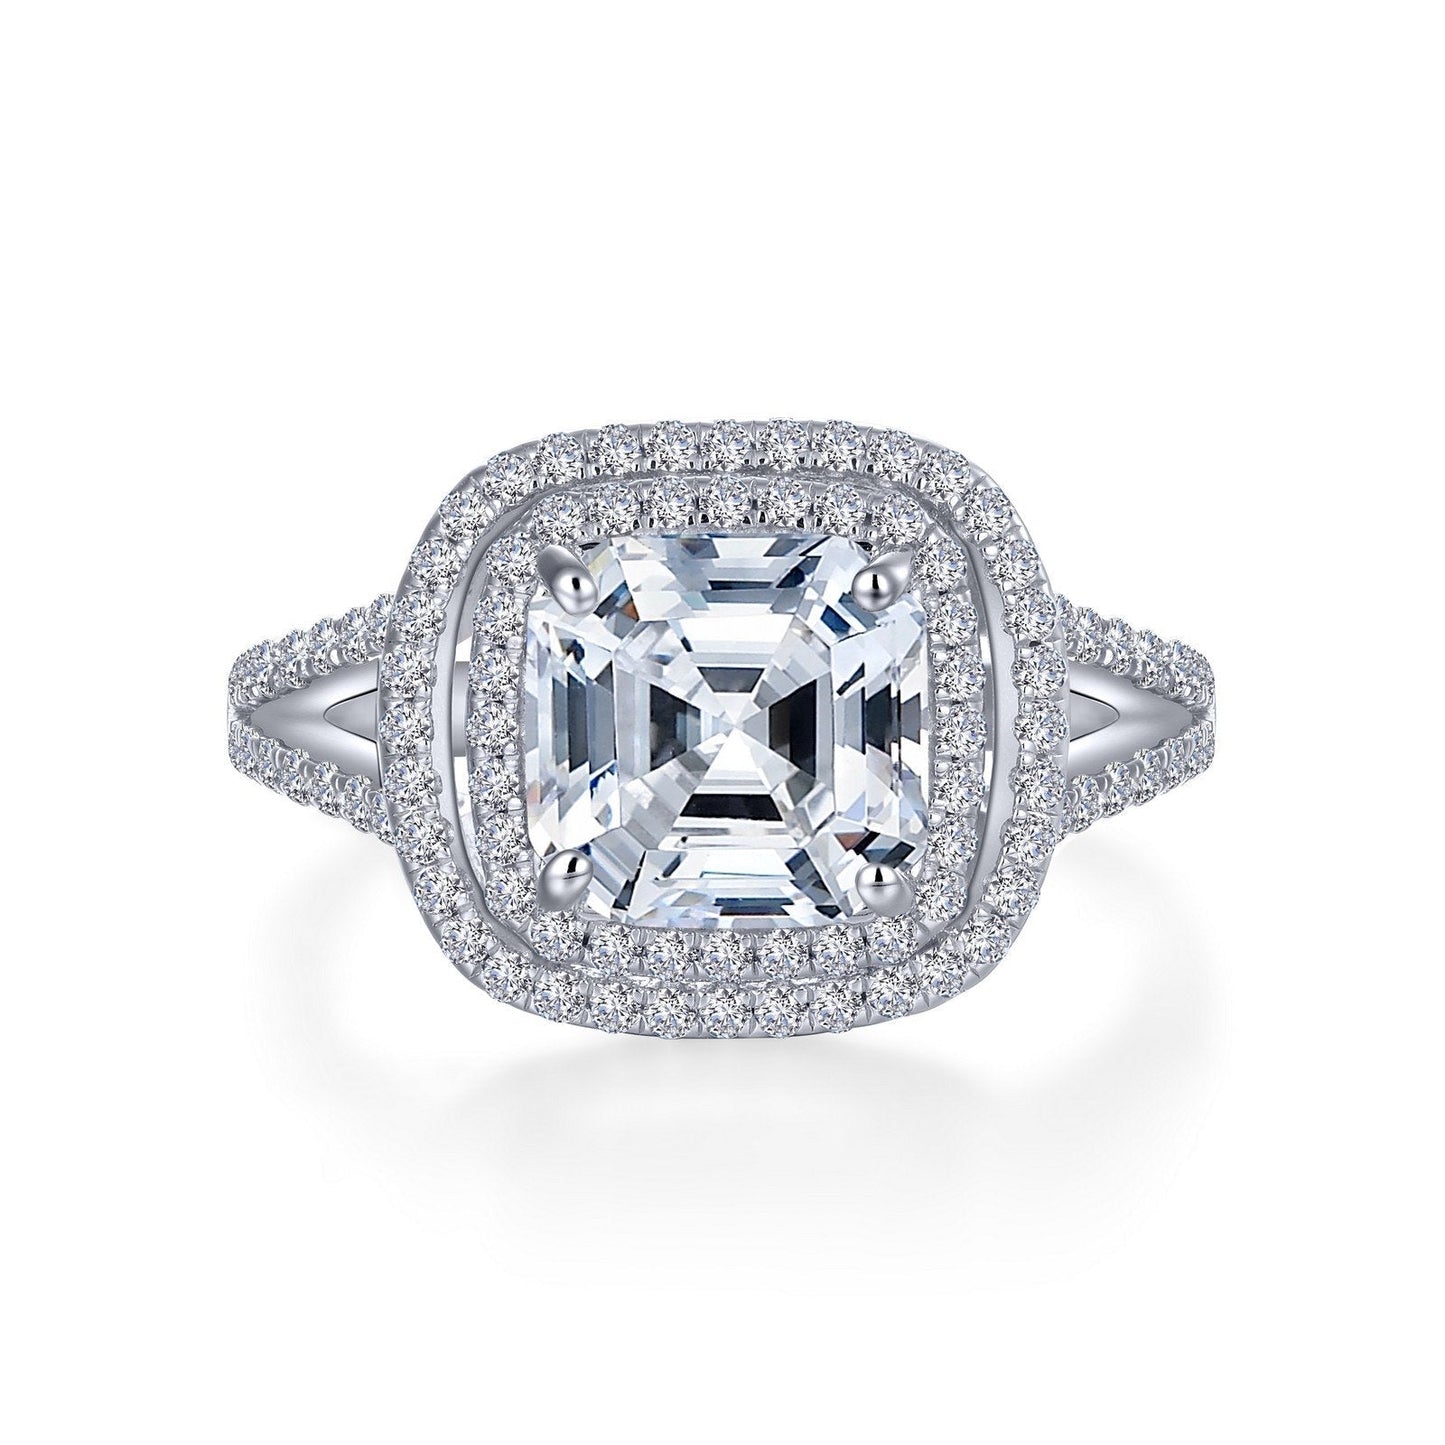 Lafonn Stunning Engagement Ring Simulated Diamond RINGS Size 6 Platinum 4 CTS Approx. 13.5mm (W)